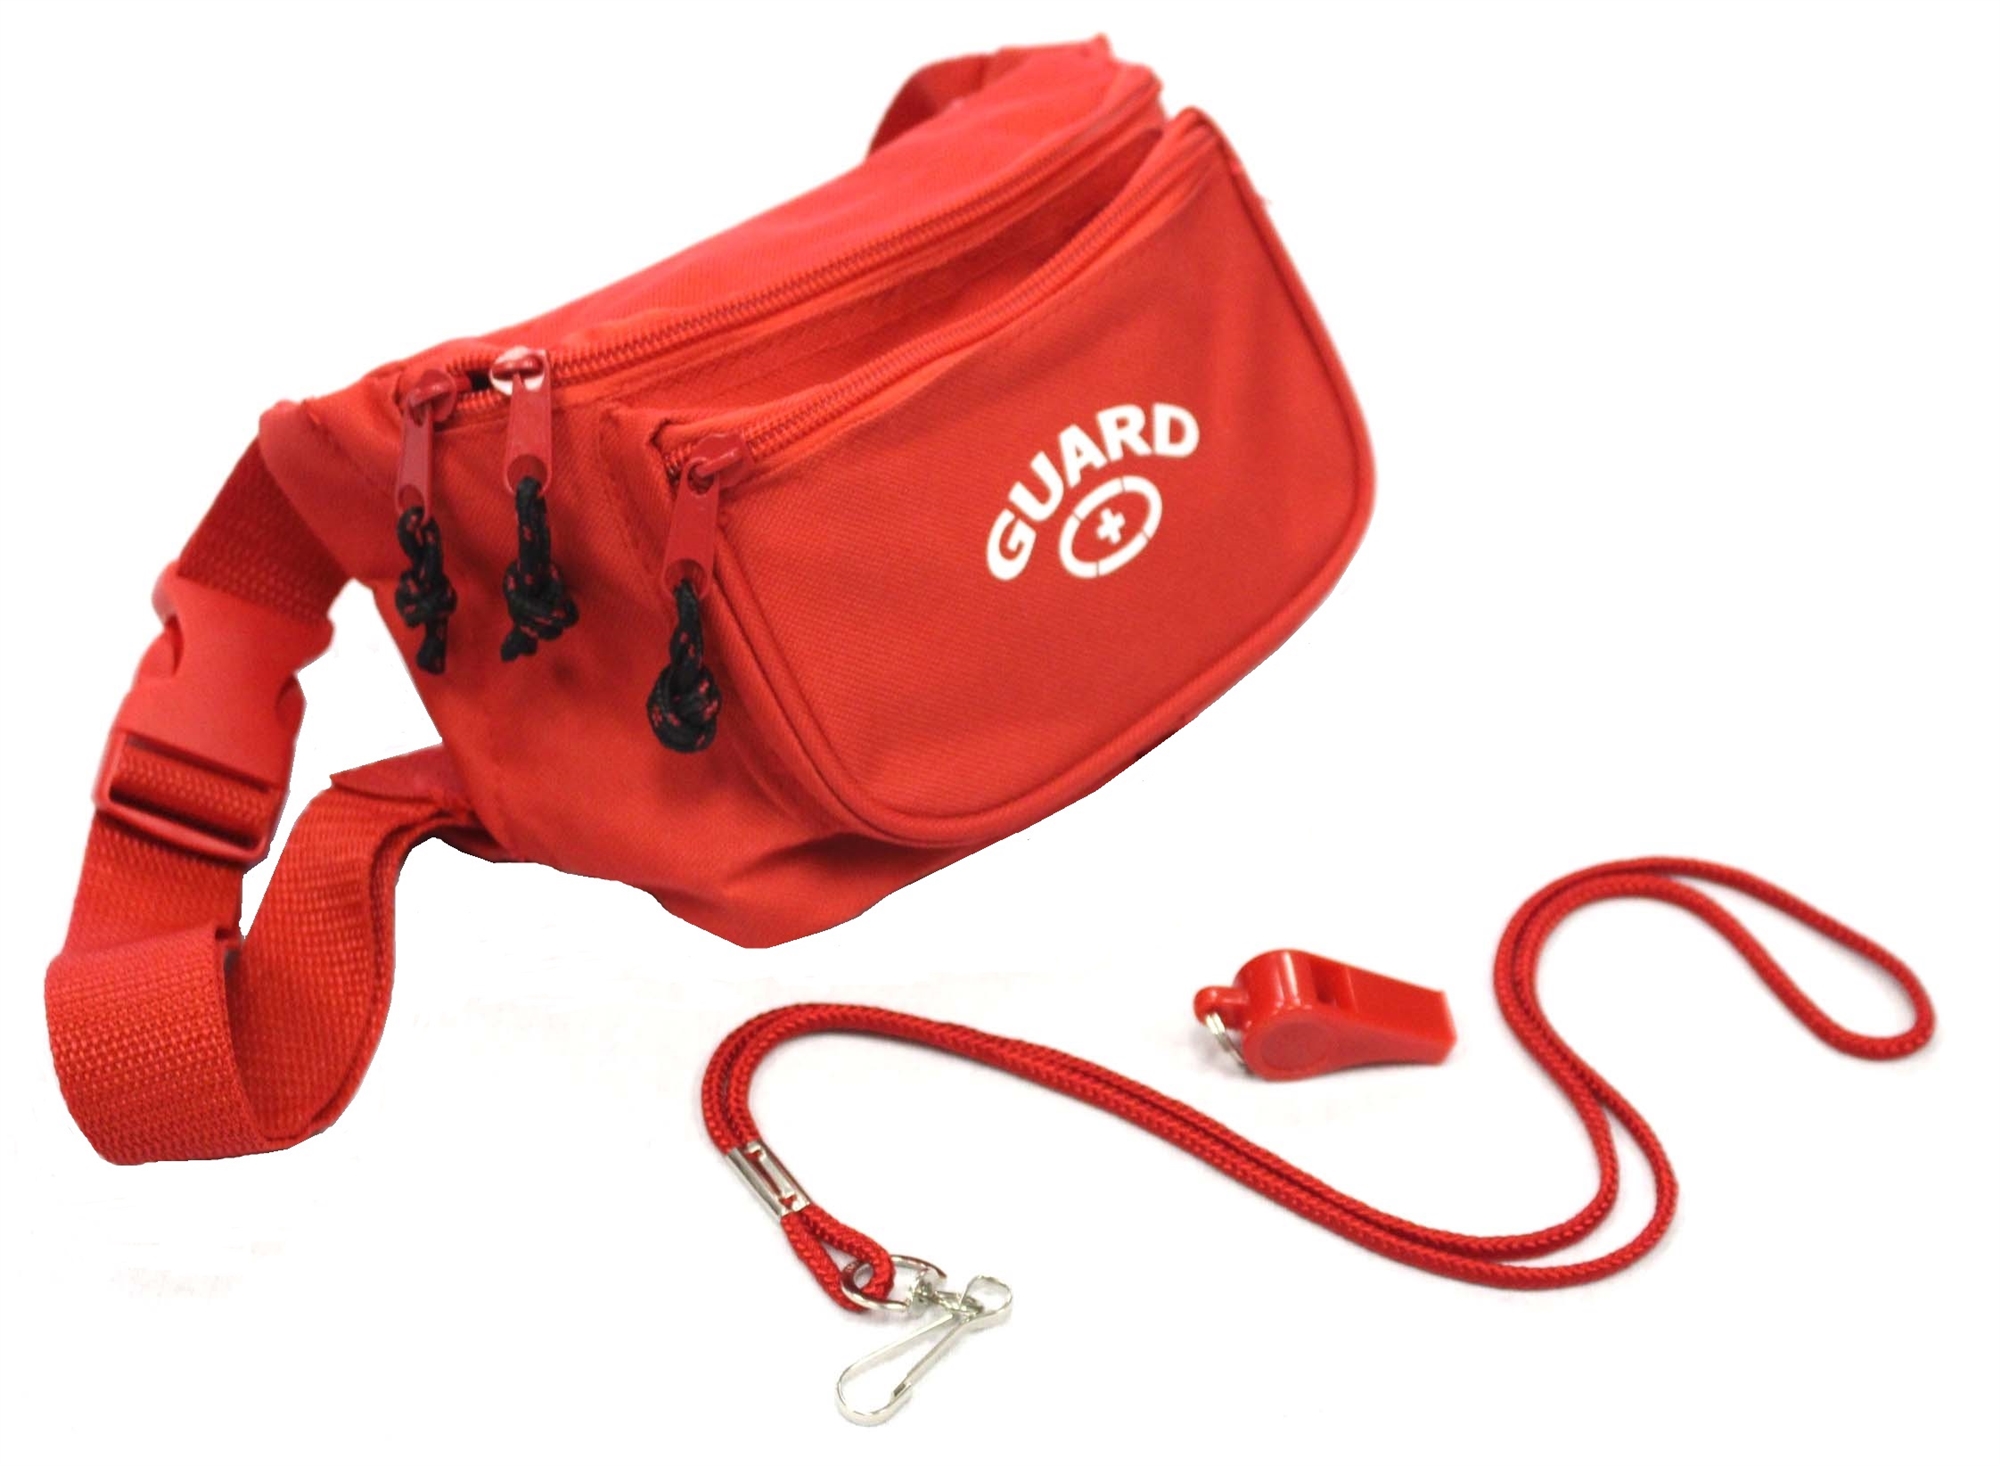 Adoretex Lifeguard Fanny Pack Whistle with Lanyard Equipment Set at ...